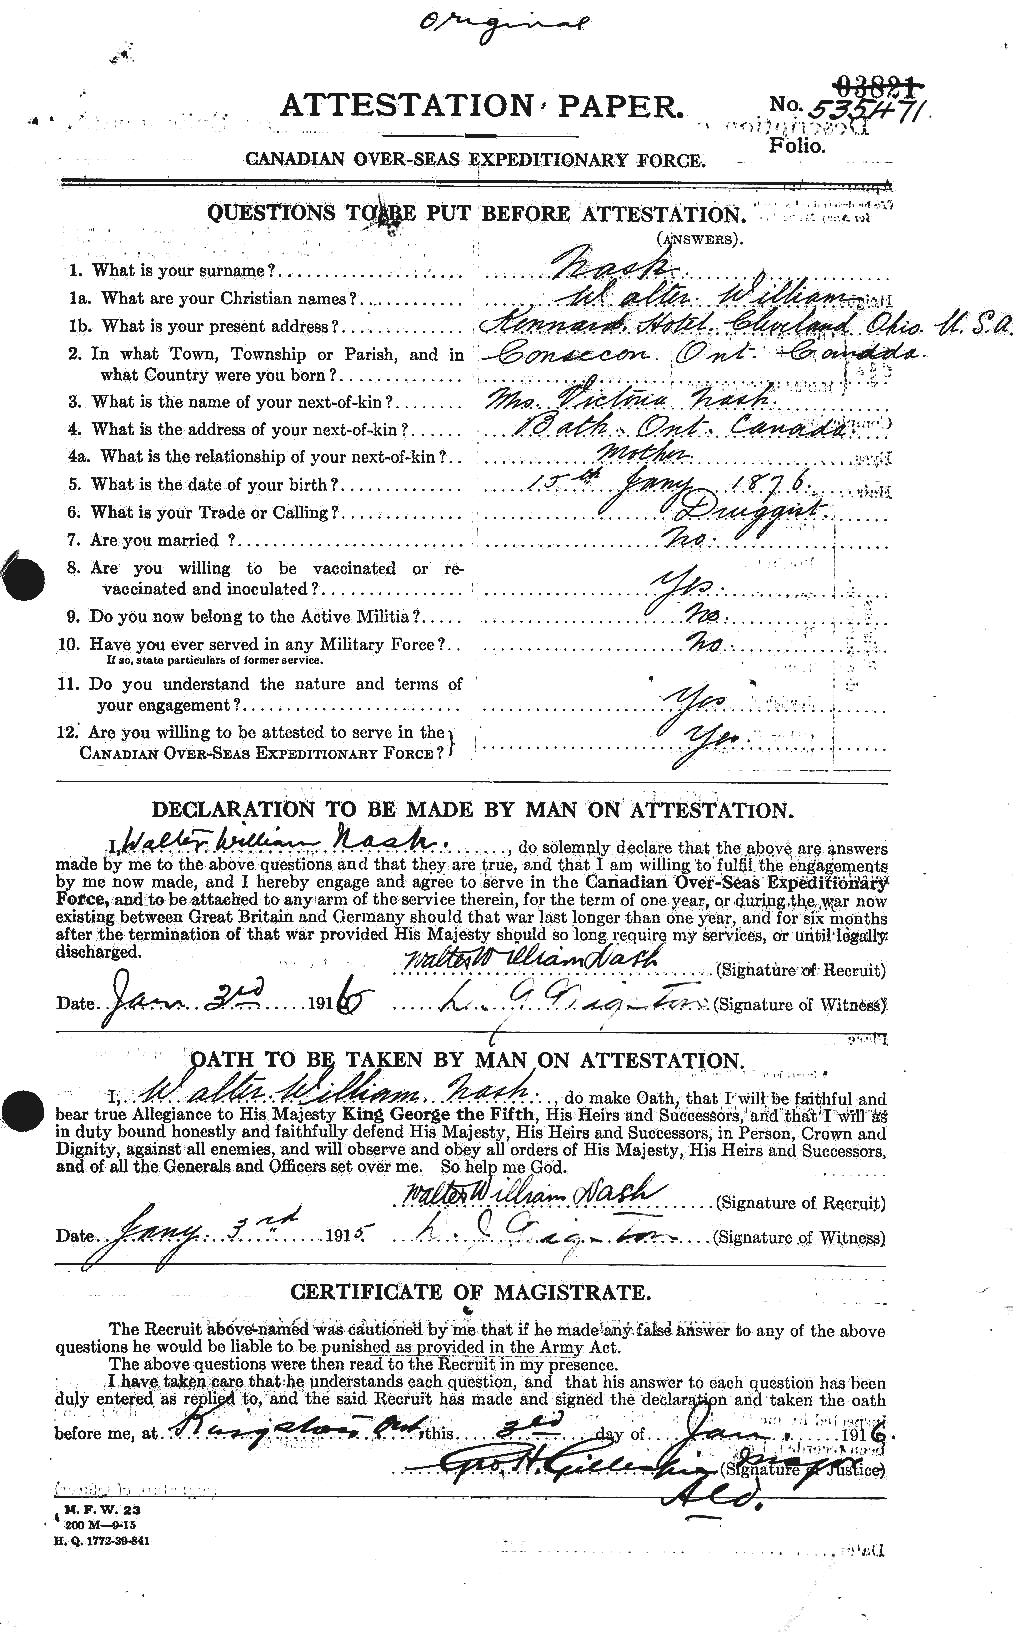 Personnel Records of the First World War - CEF 549064a